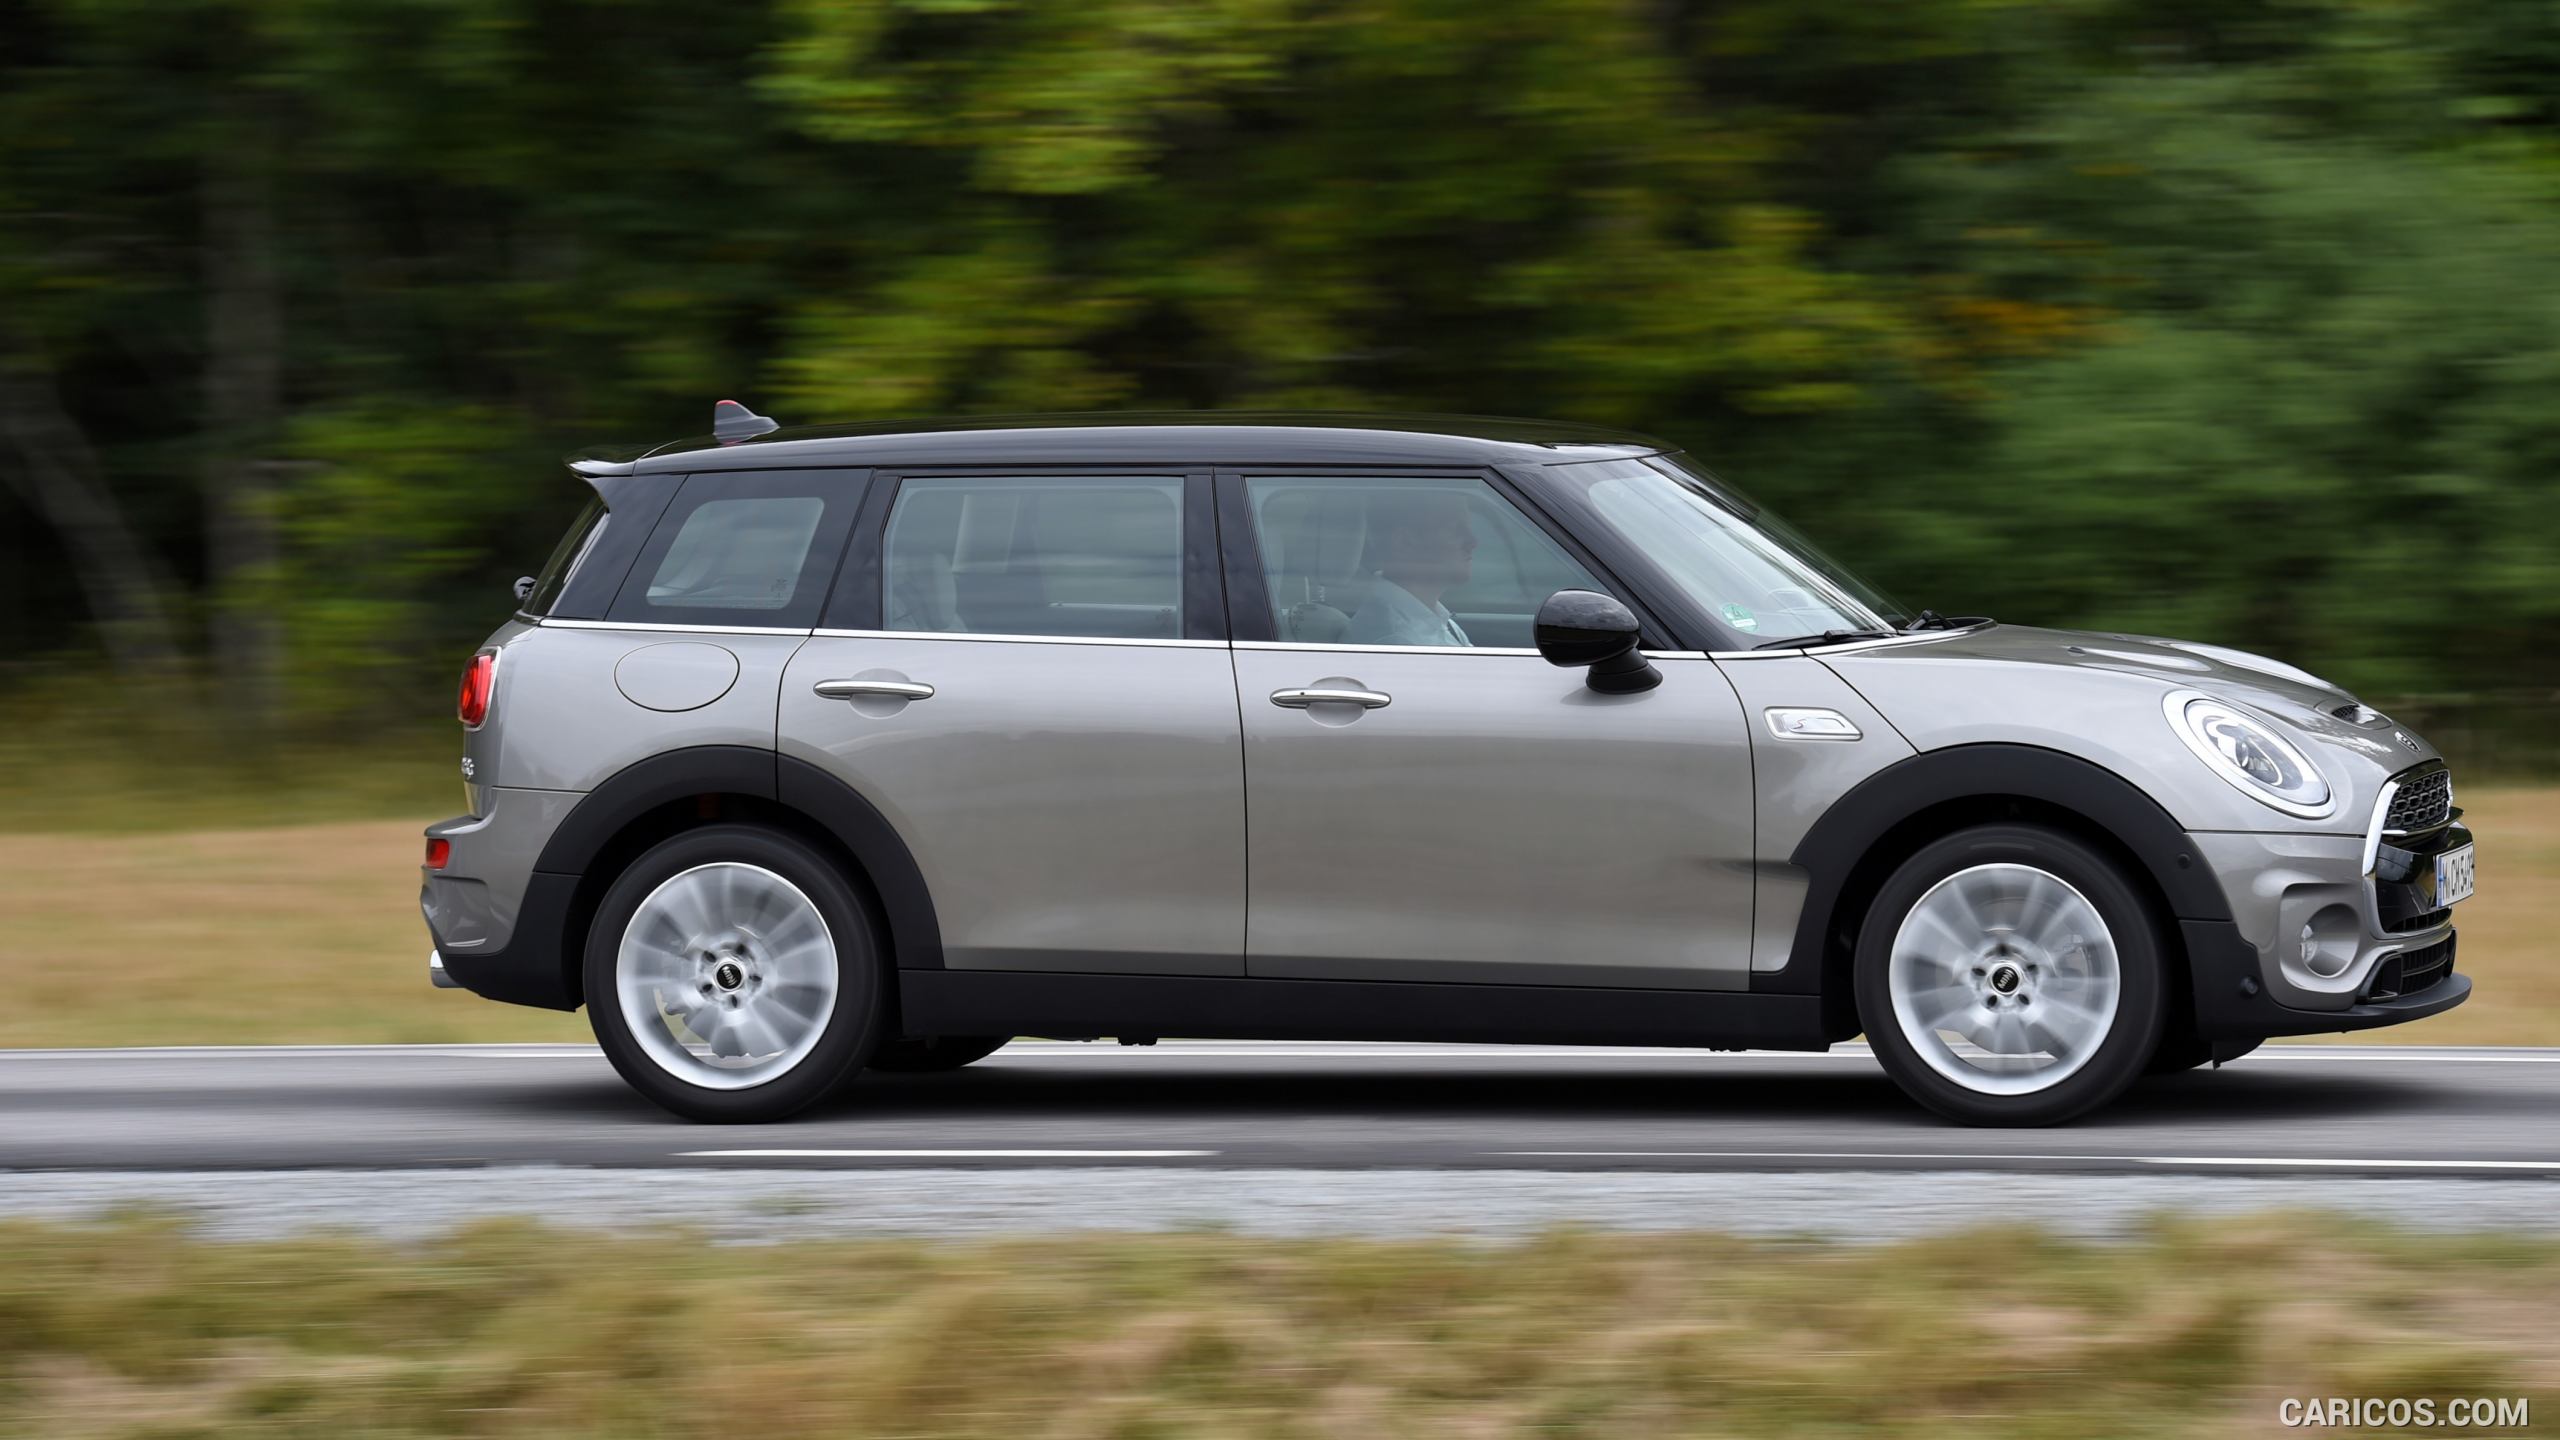 2016 MINI Cooper S Clubman in Metallic Melting Silver - Side, #154 of 380